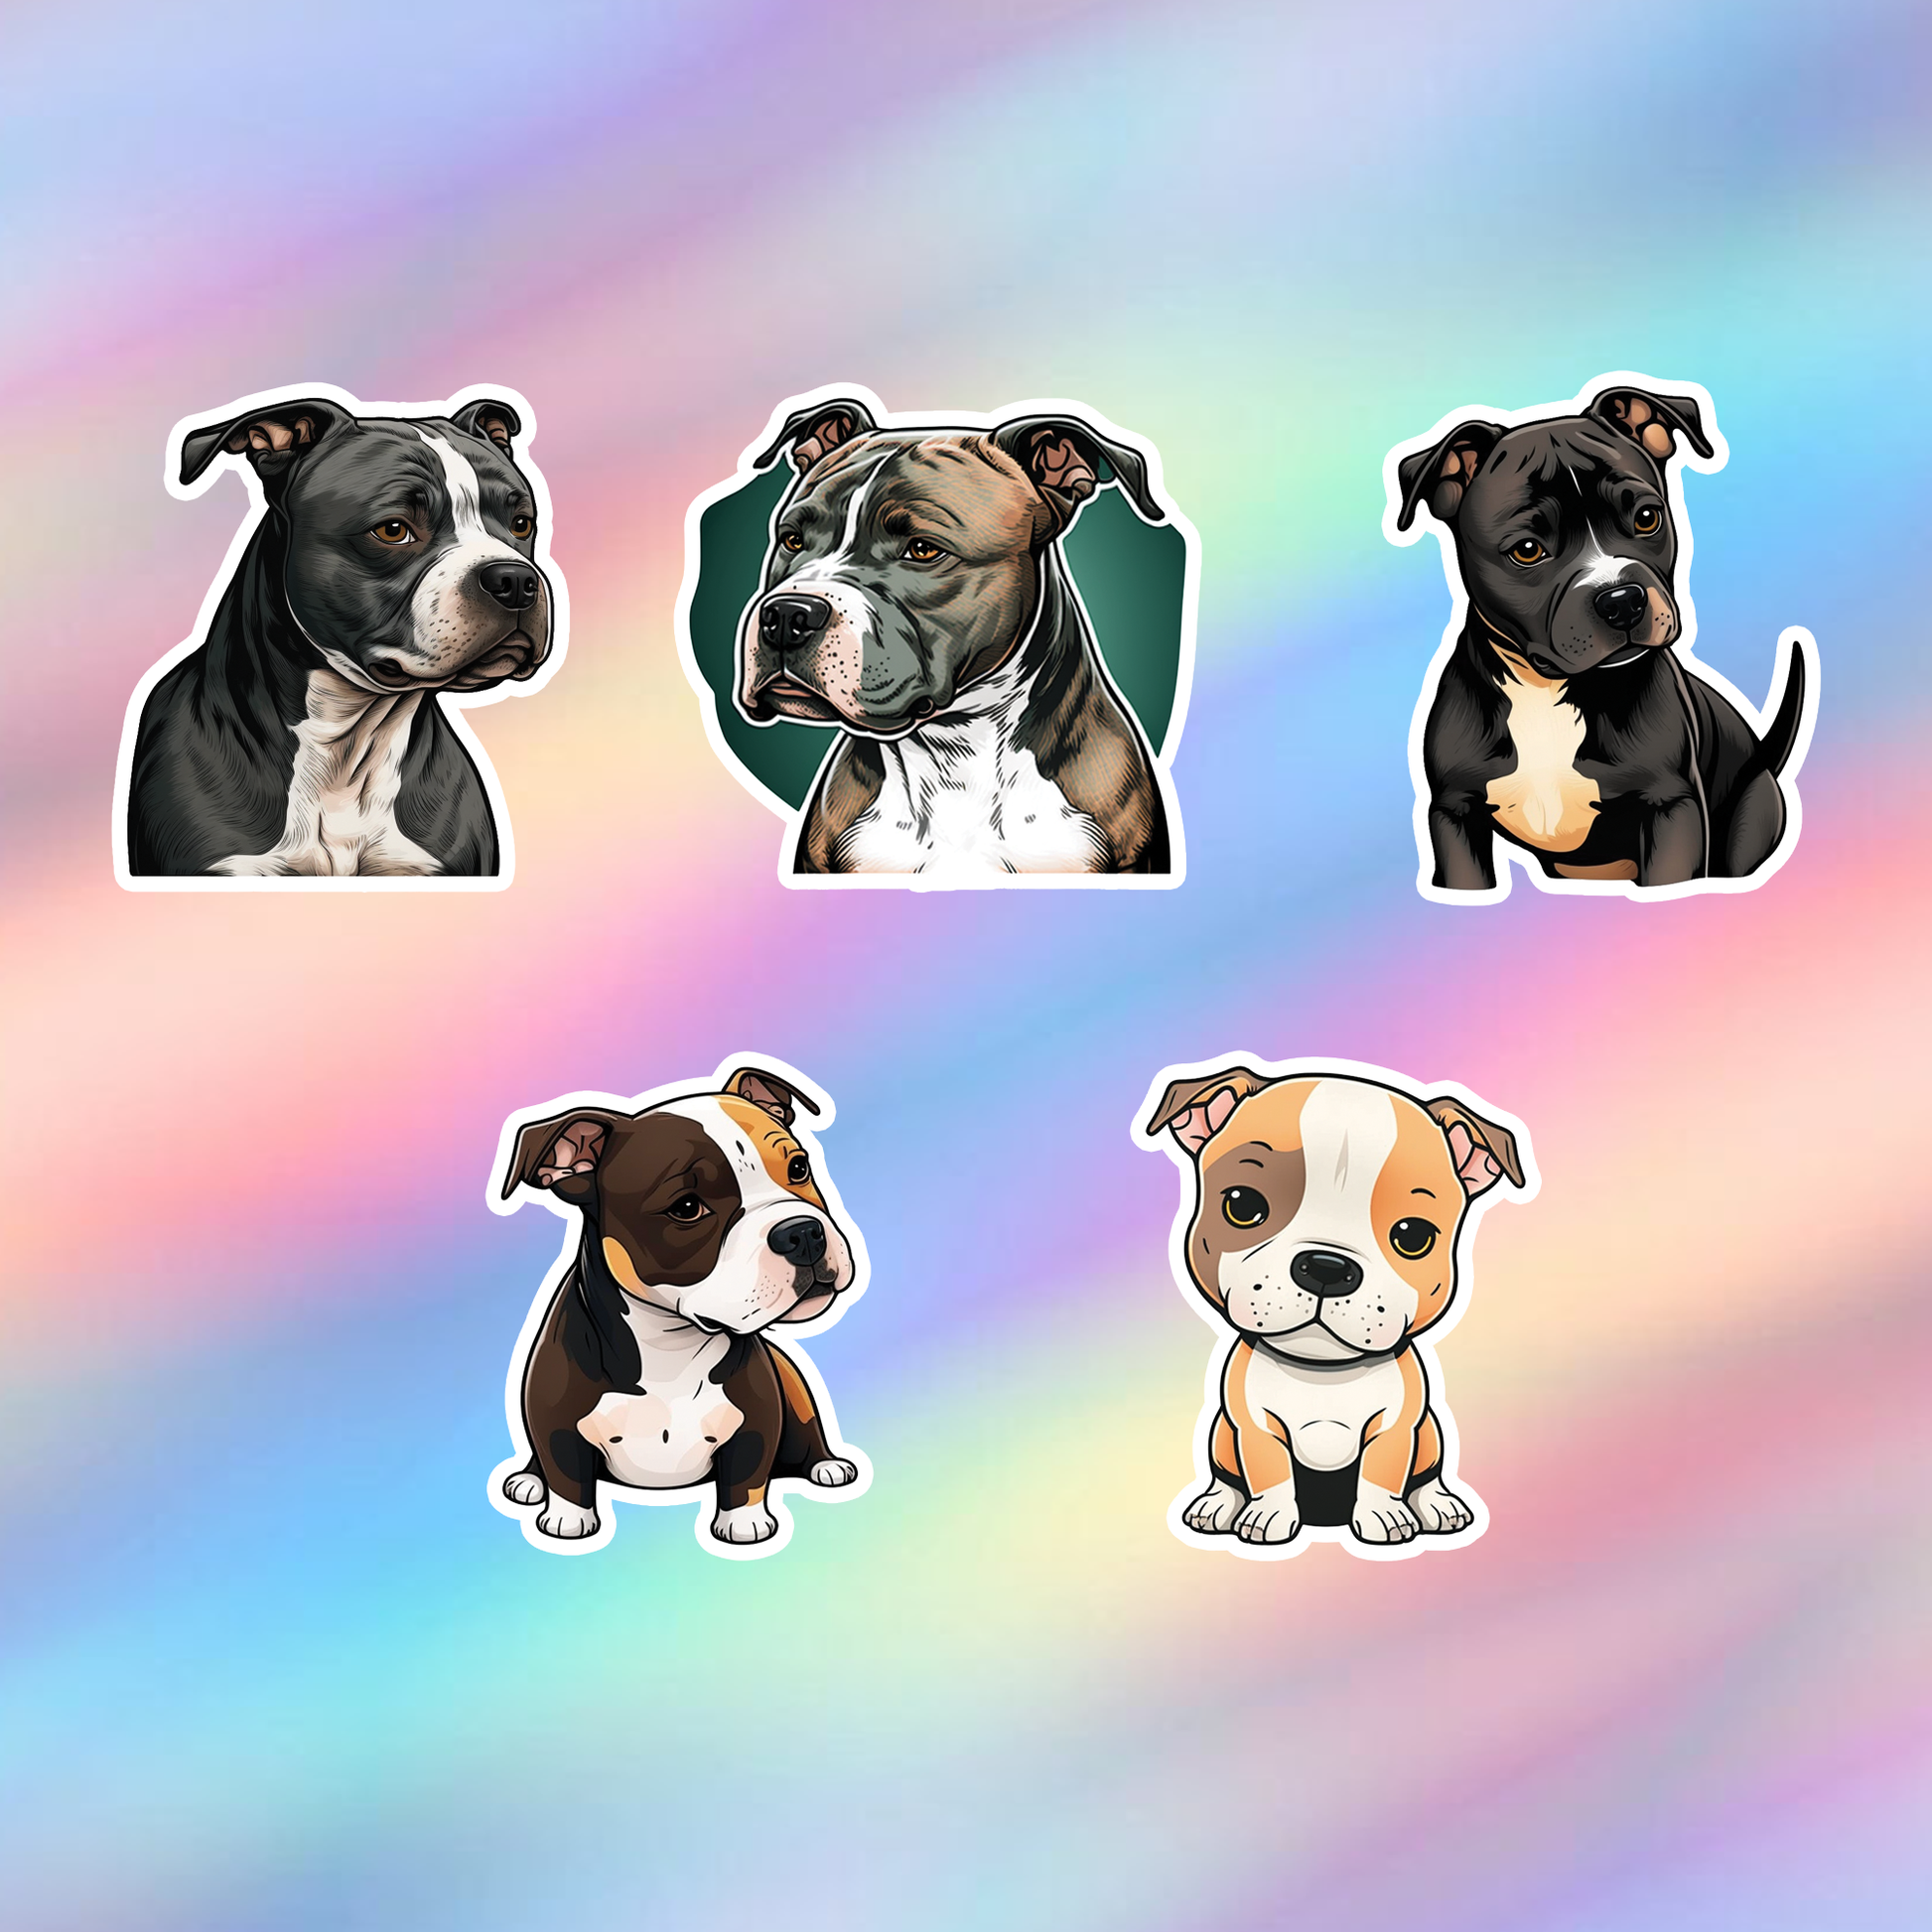 Staffordshire Bull Terrier Stickers Pack of 5